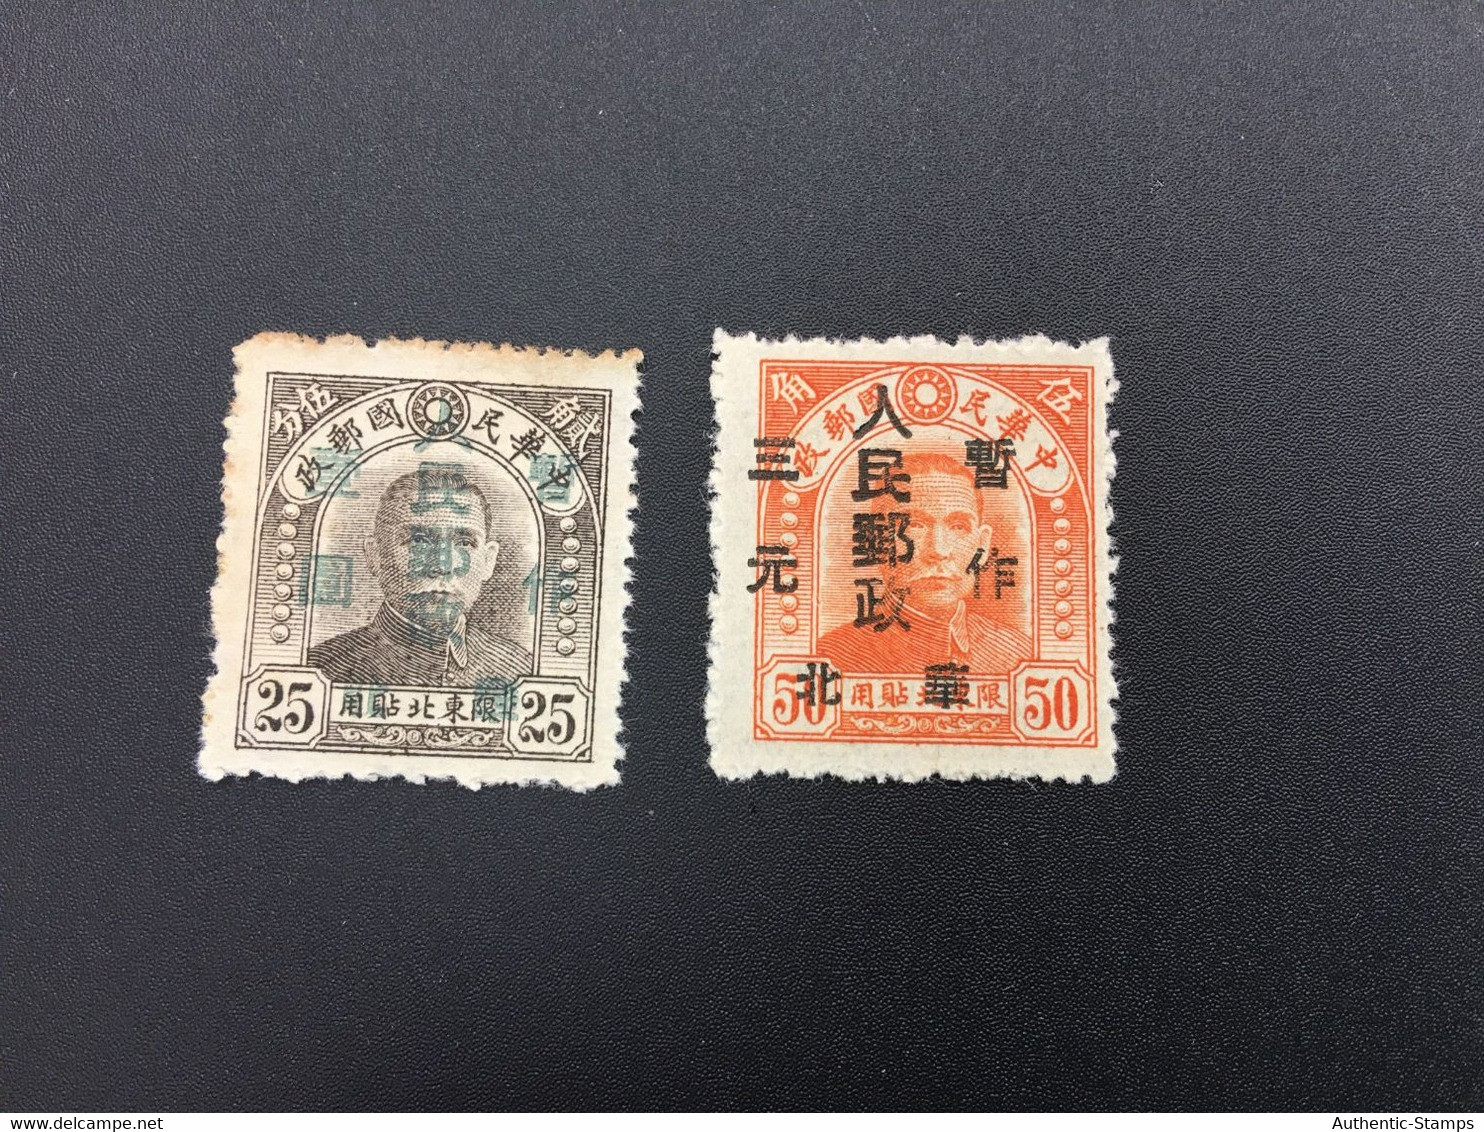 CHINA STAMP, SET, LIBERATED AREA, UNUSED, TIMBRO, STEMPEL, CINA, CHINE, LIST 6327 - Cina Del Nord 1949-50